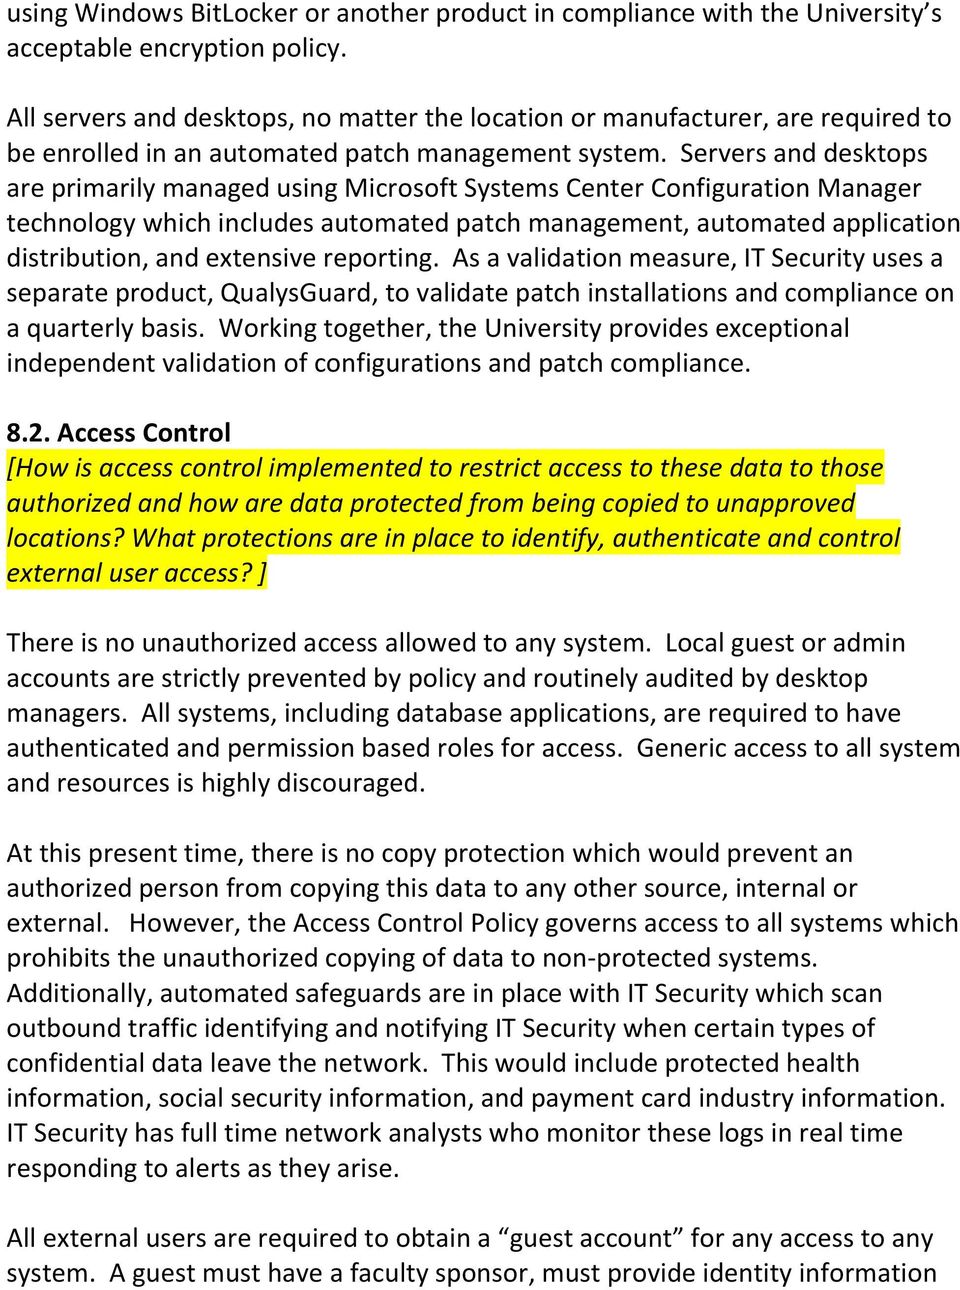 Servers and desktops are primarily managed using Microsoft Systems Center Configuration Manager technology which includes automated patch management, automated application distribution, and extensive